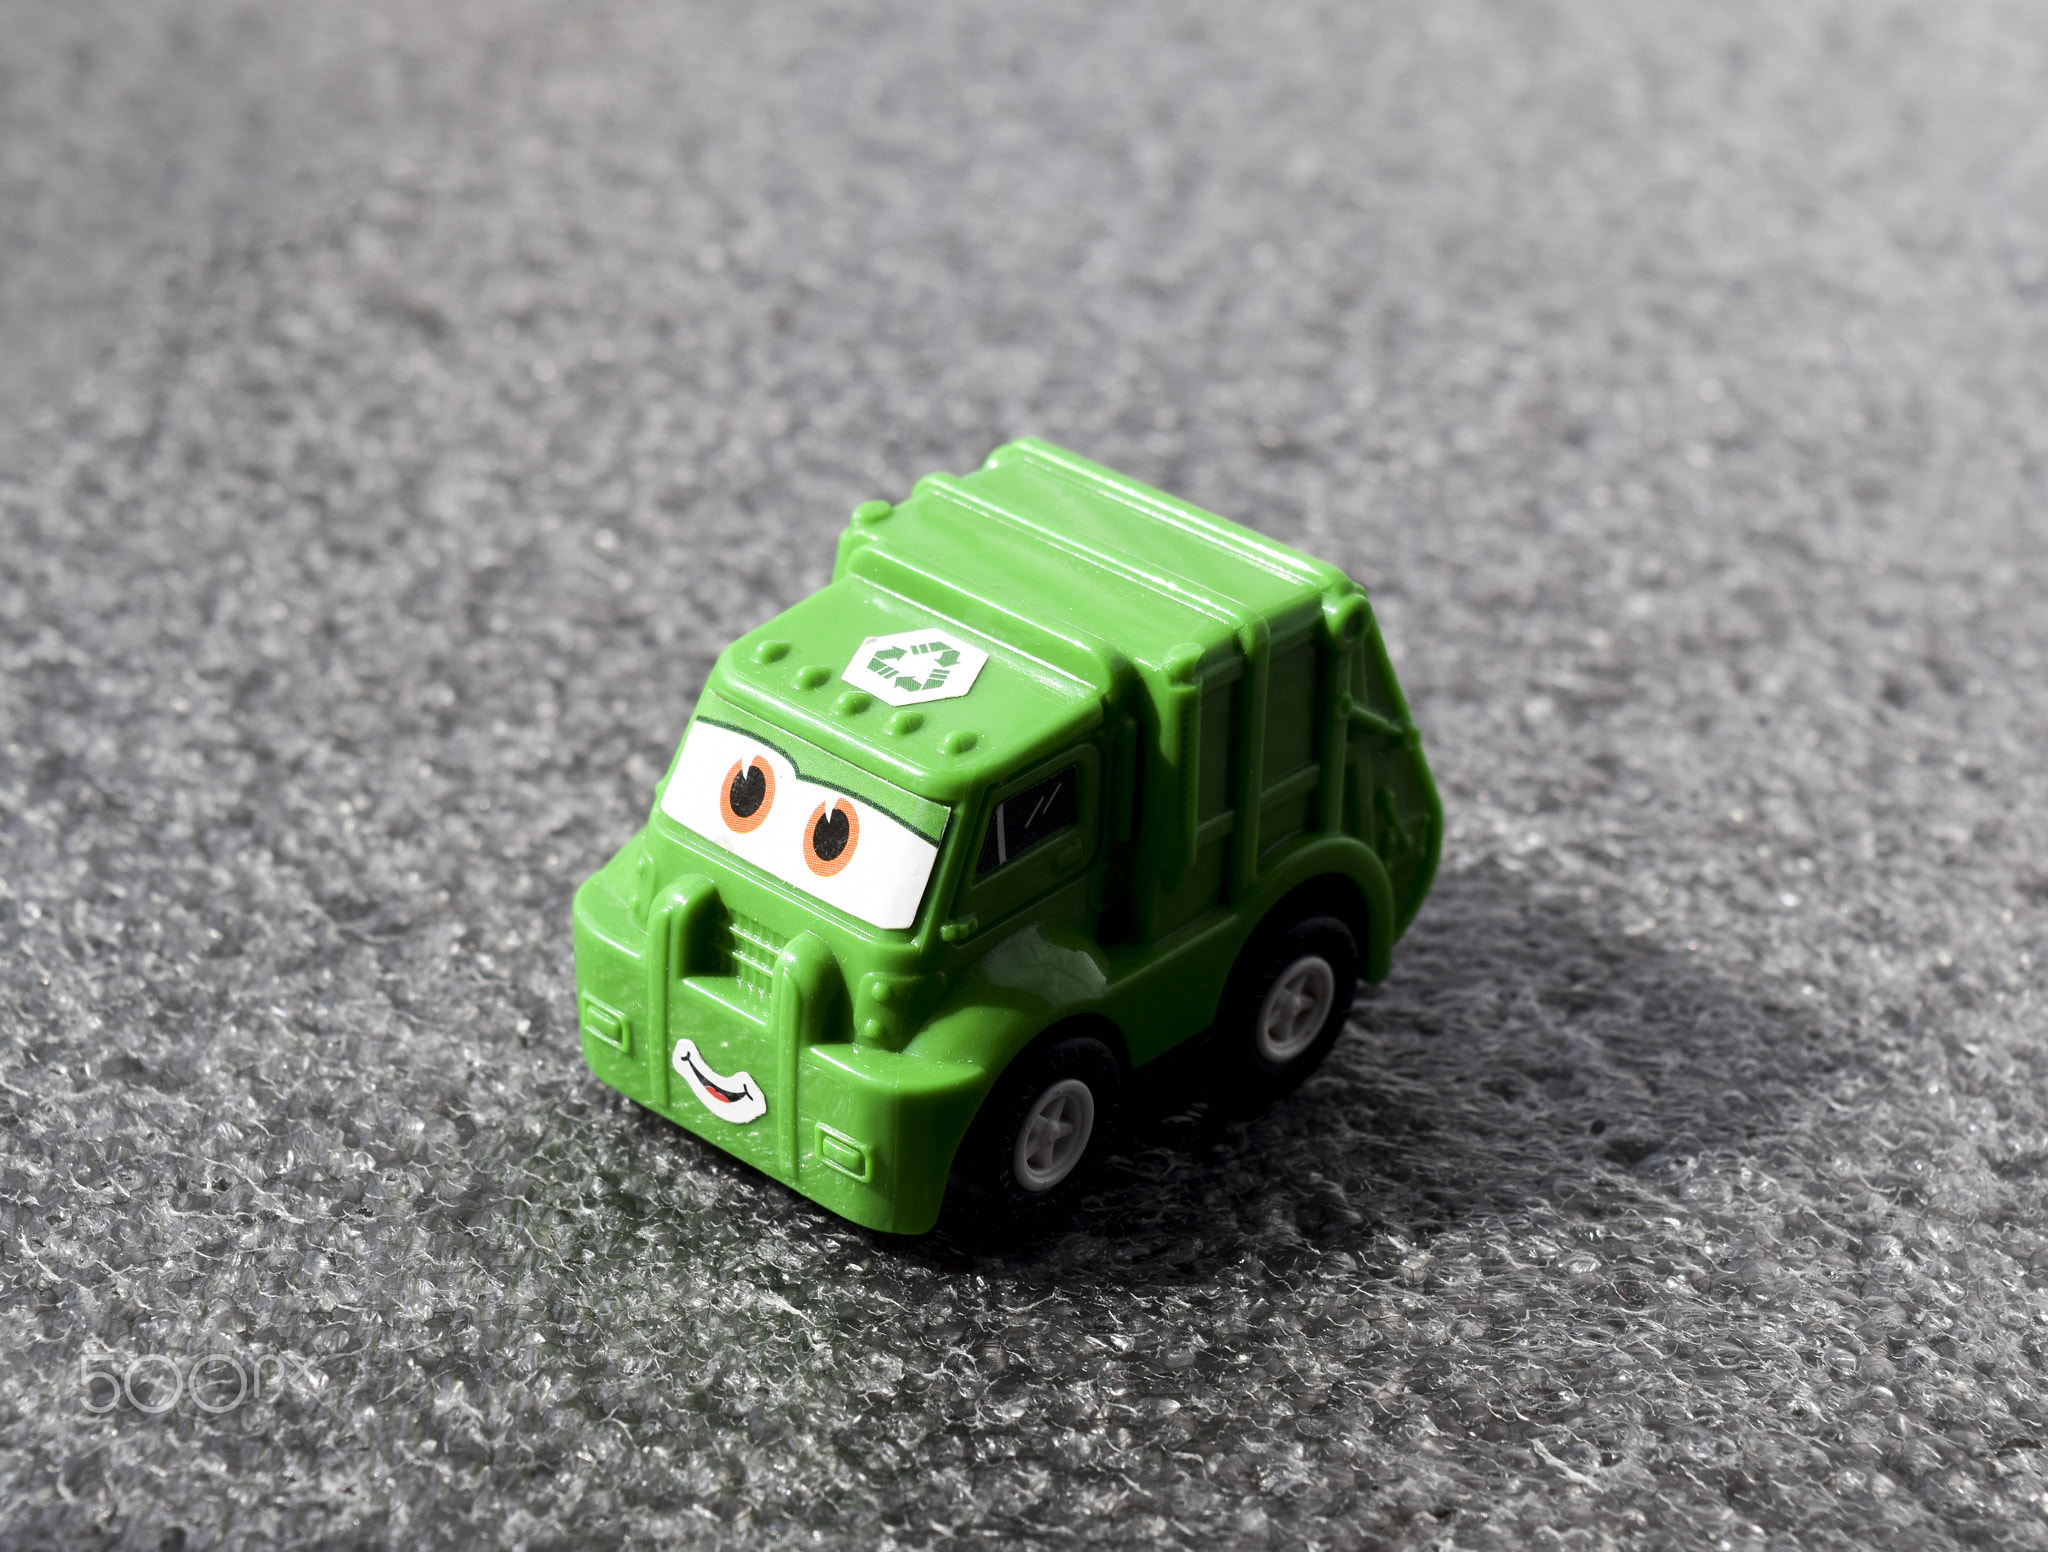 Toy Plastic car is green.